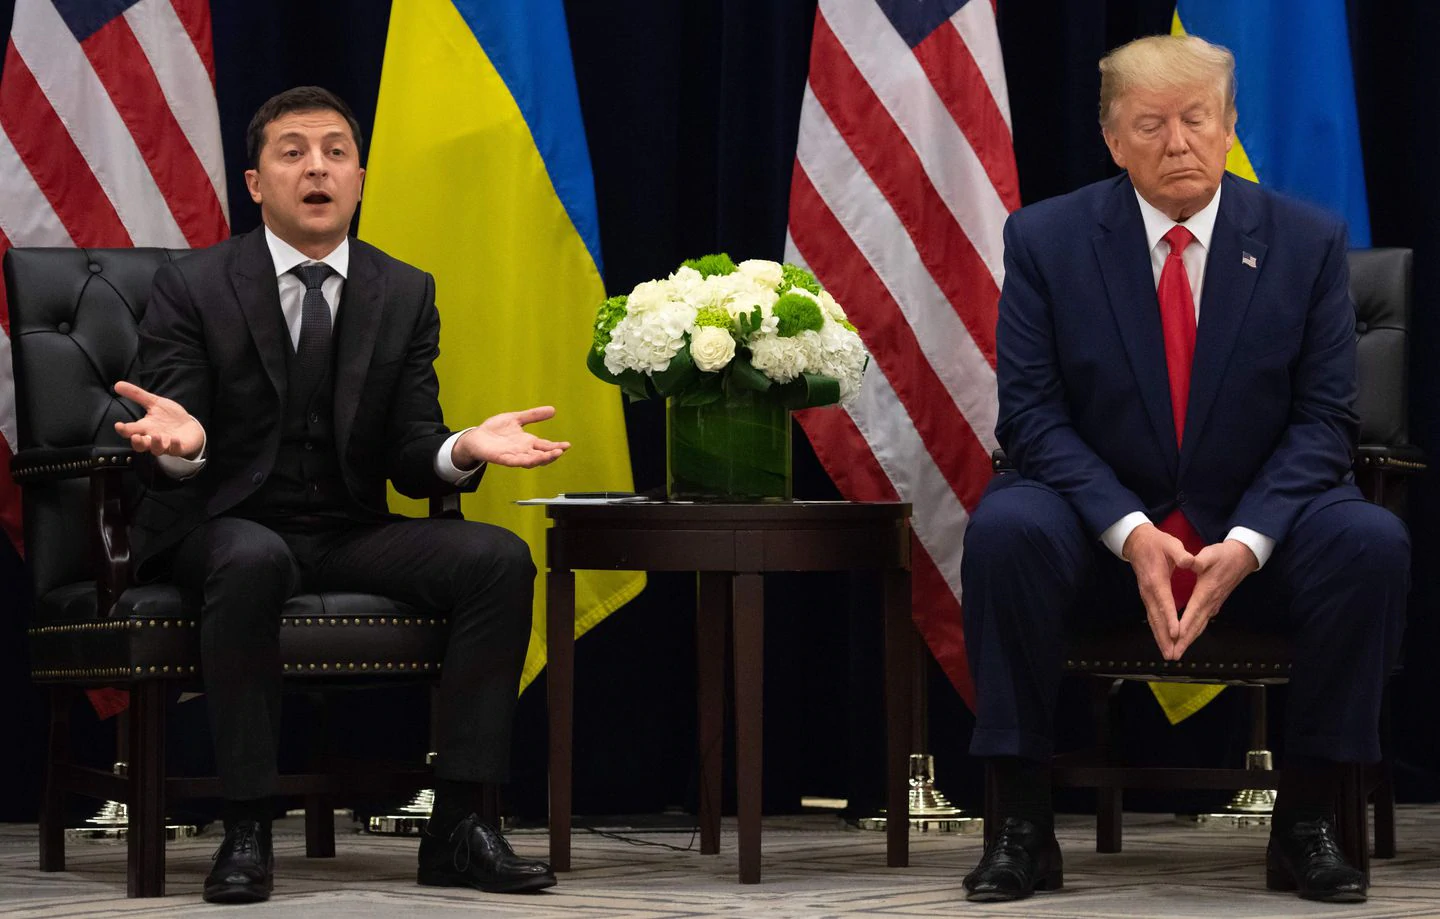 President Trump sought to cut federal programs aimed at supporting anti-corruption efforts in Ukraine and abroad